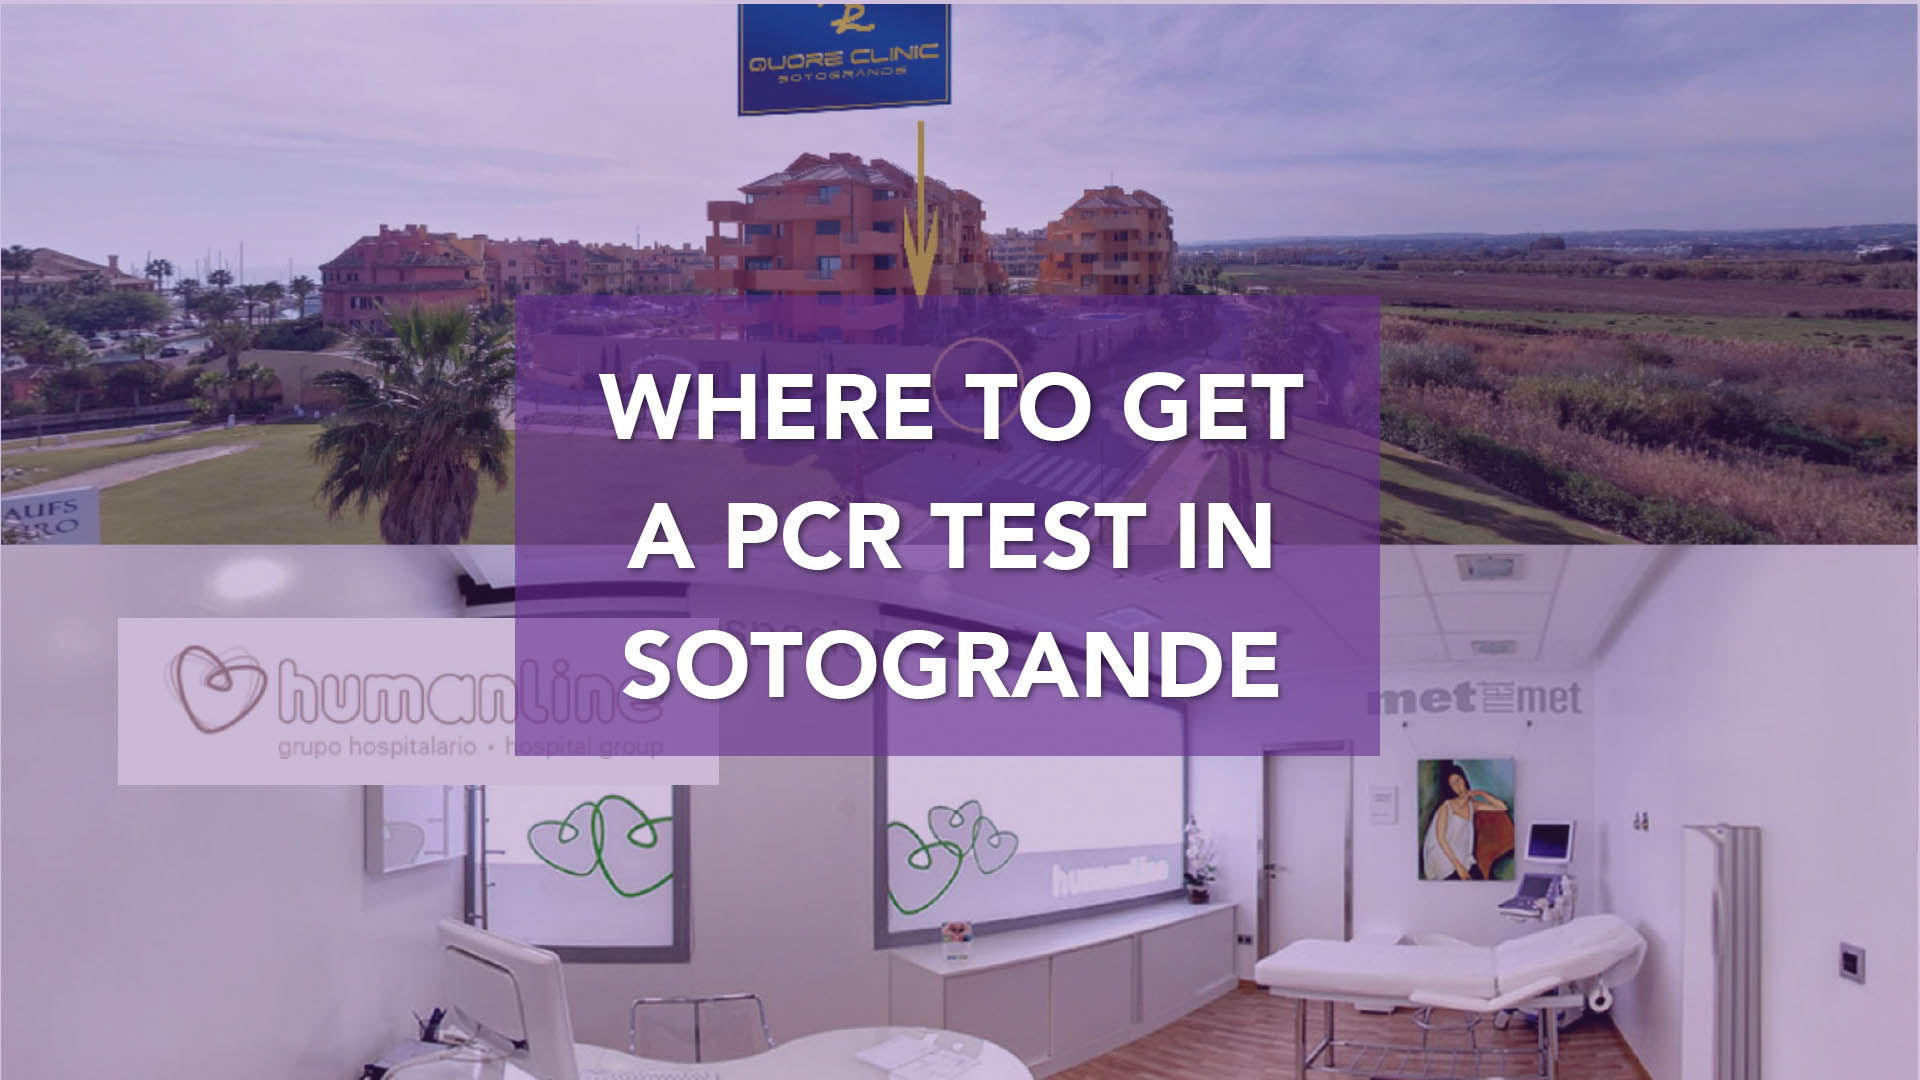 Where to get a PCR test in Sotogrande June 2021